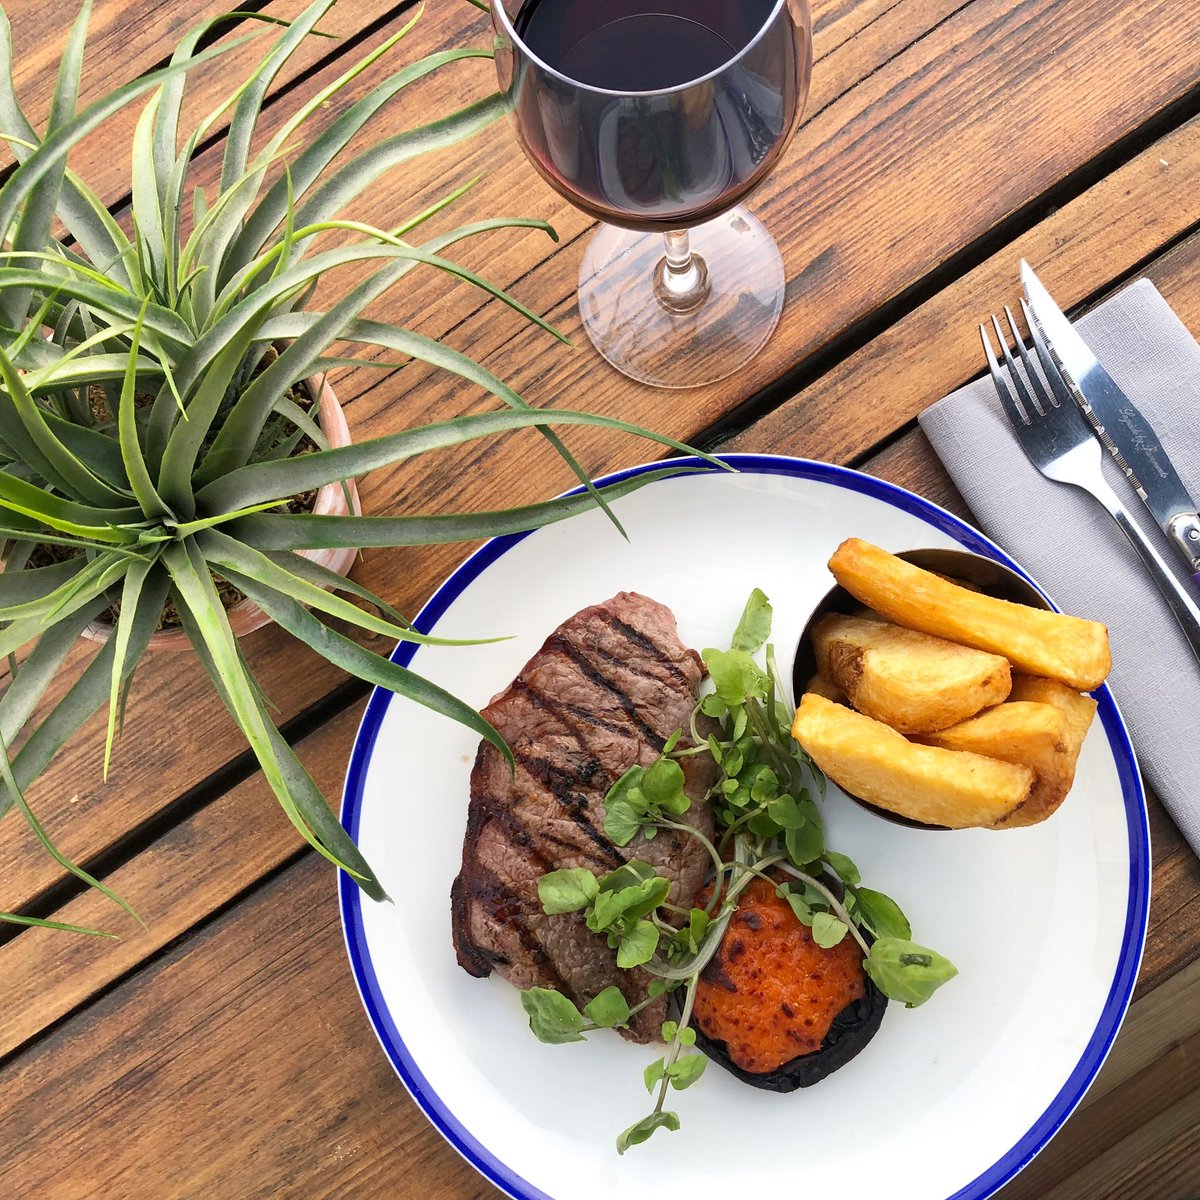 Don’t miss out on half price steaks all day today 🥩
We ❤️ Steak Tuesday!!
Call us on 01580765077 to book your table
#steaktuesday #steaklife #yum #lovefood #bestservice #smilesallround #tenterden #kent